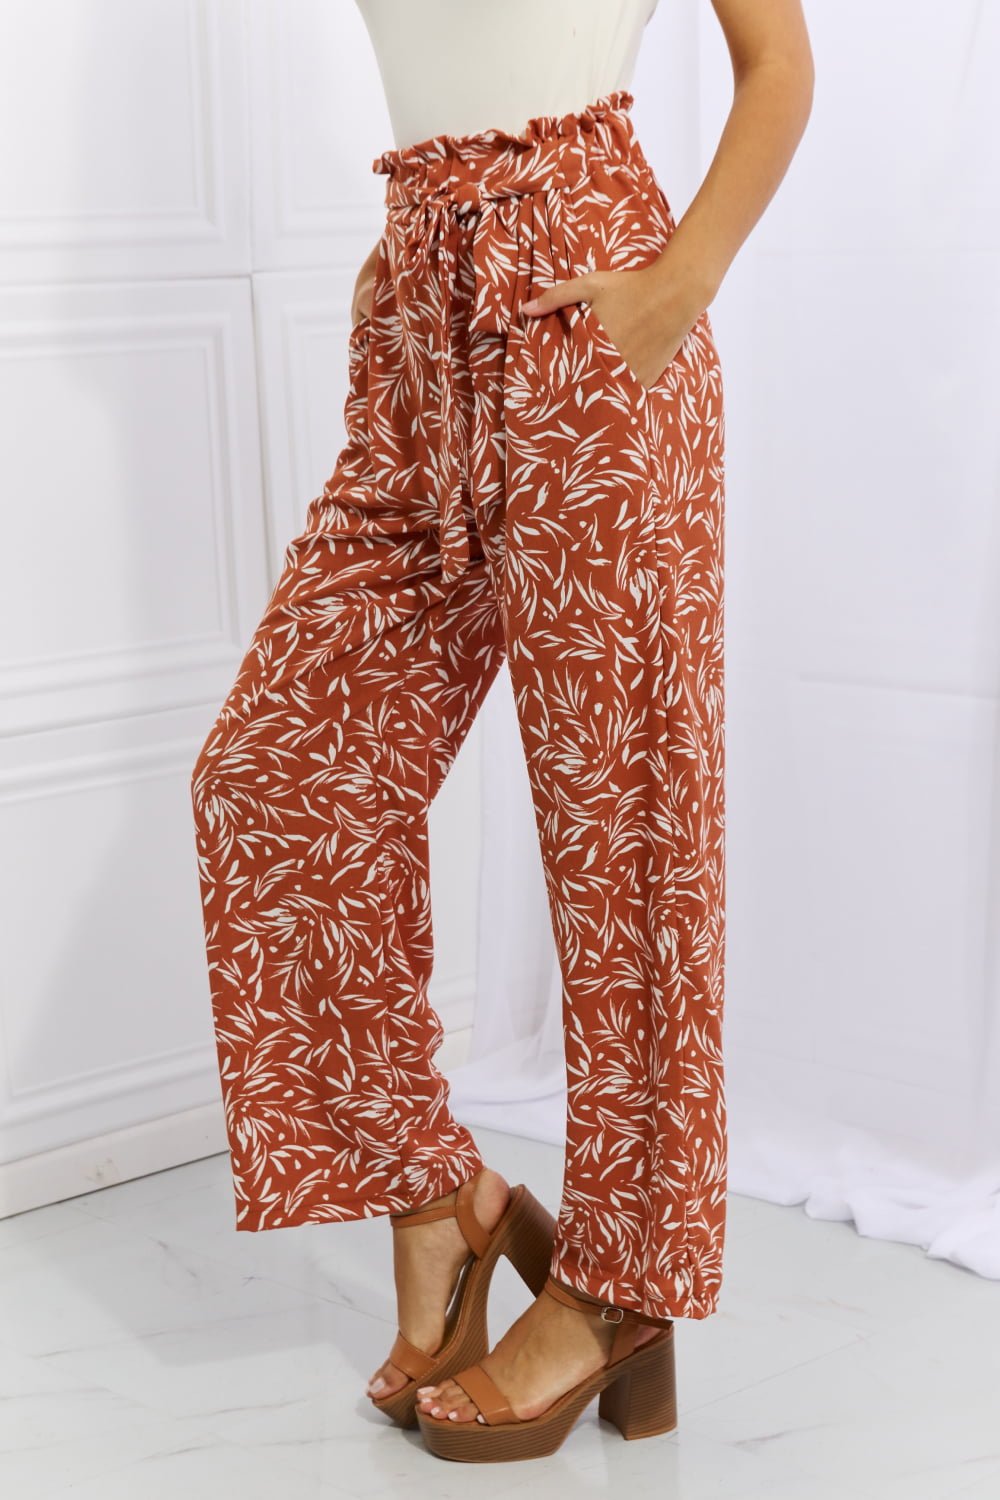 Heimish Right Angle Full Size Geometric Printed Pants in Red Orange - seldenkingsley